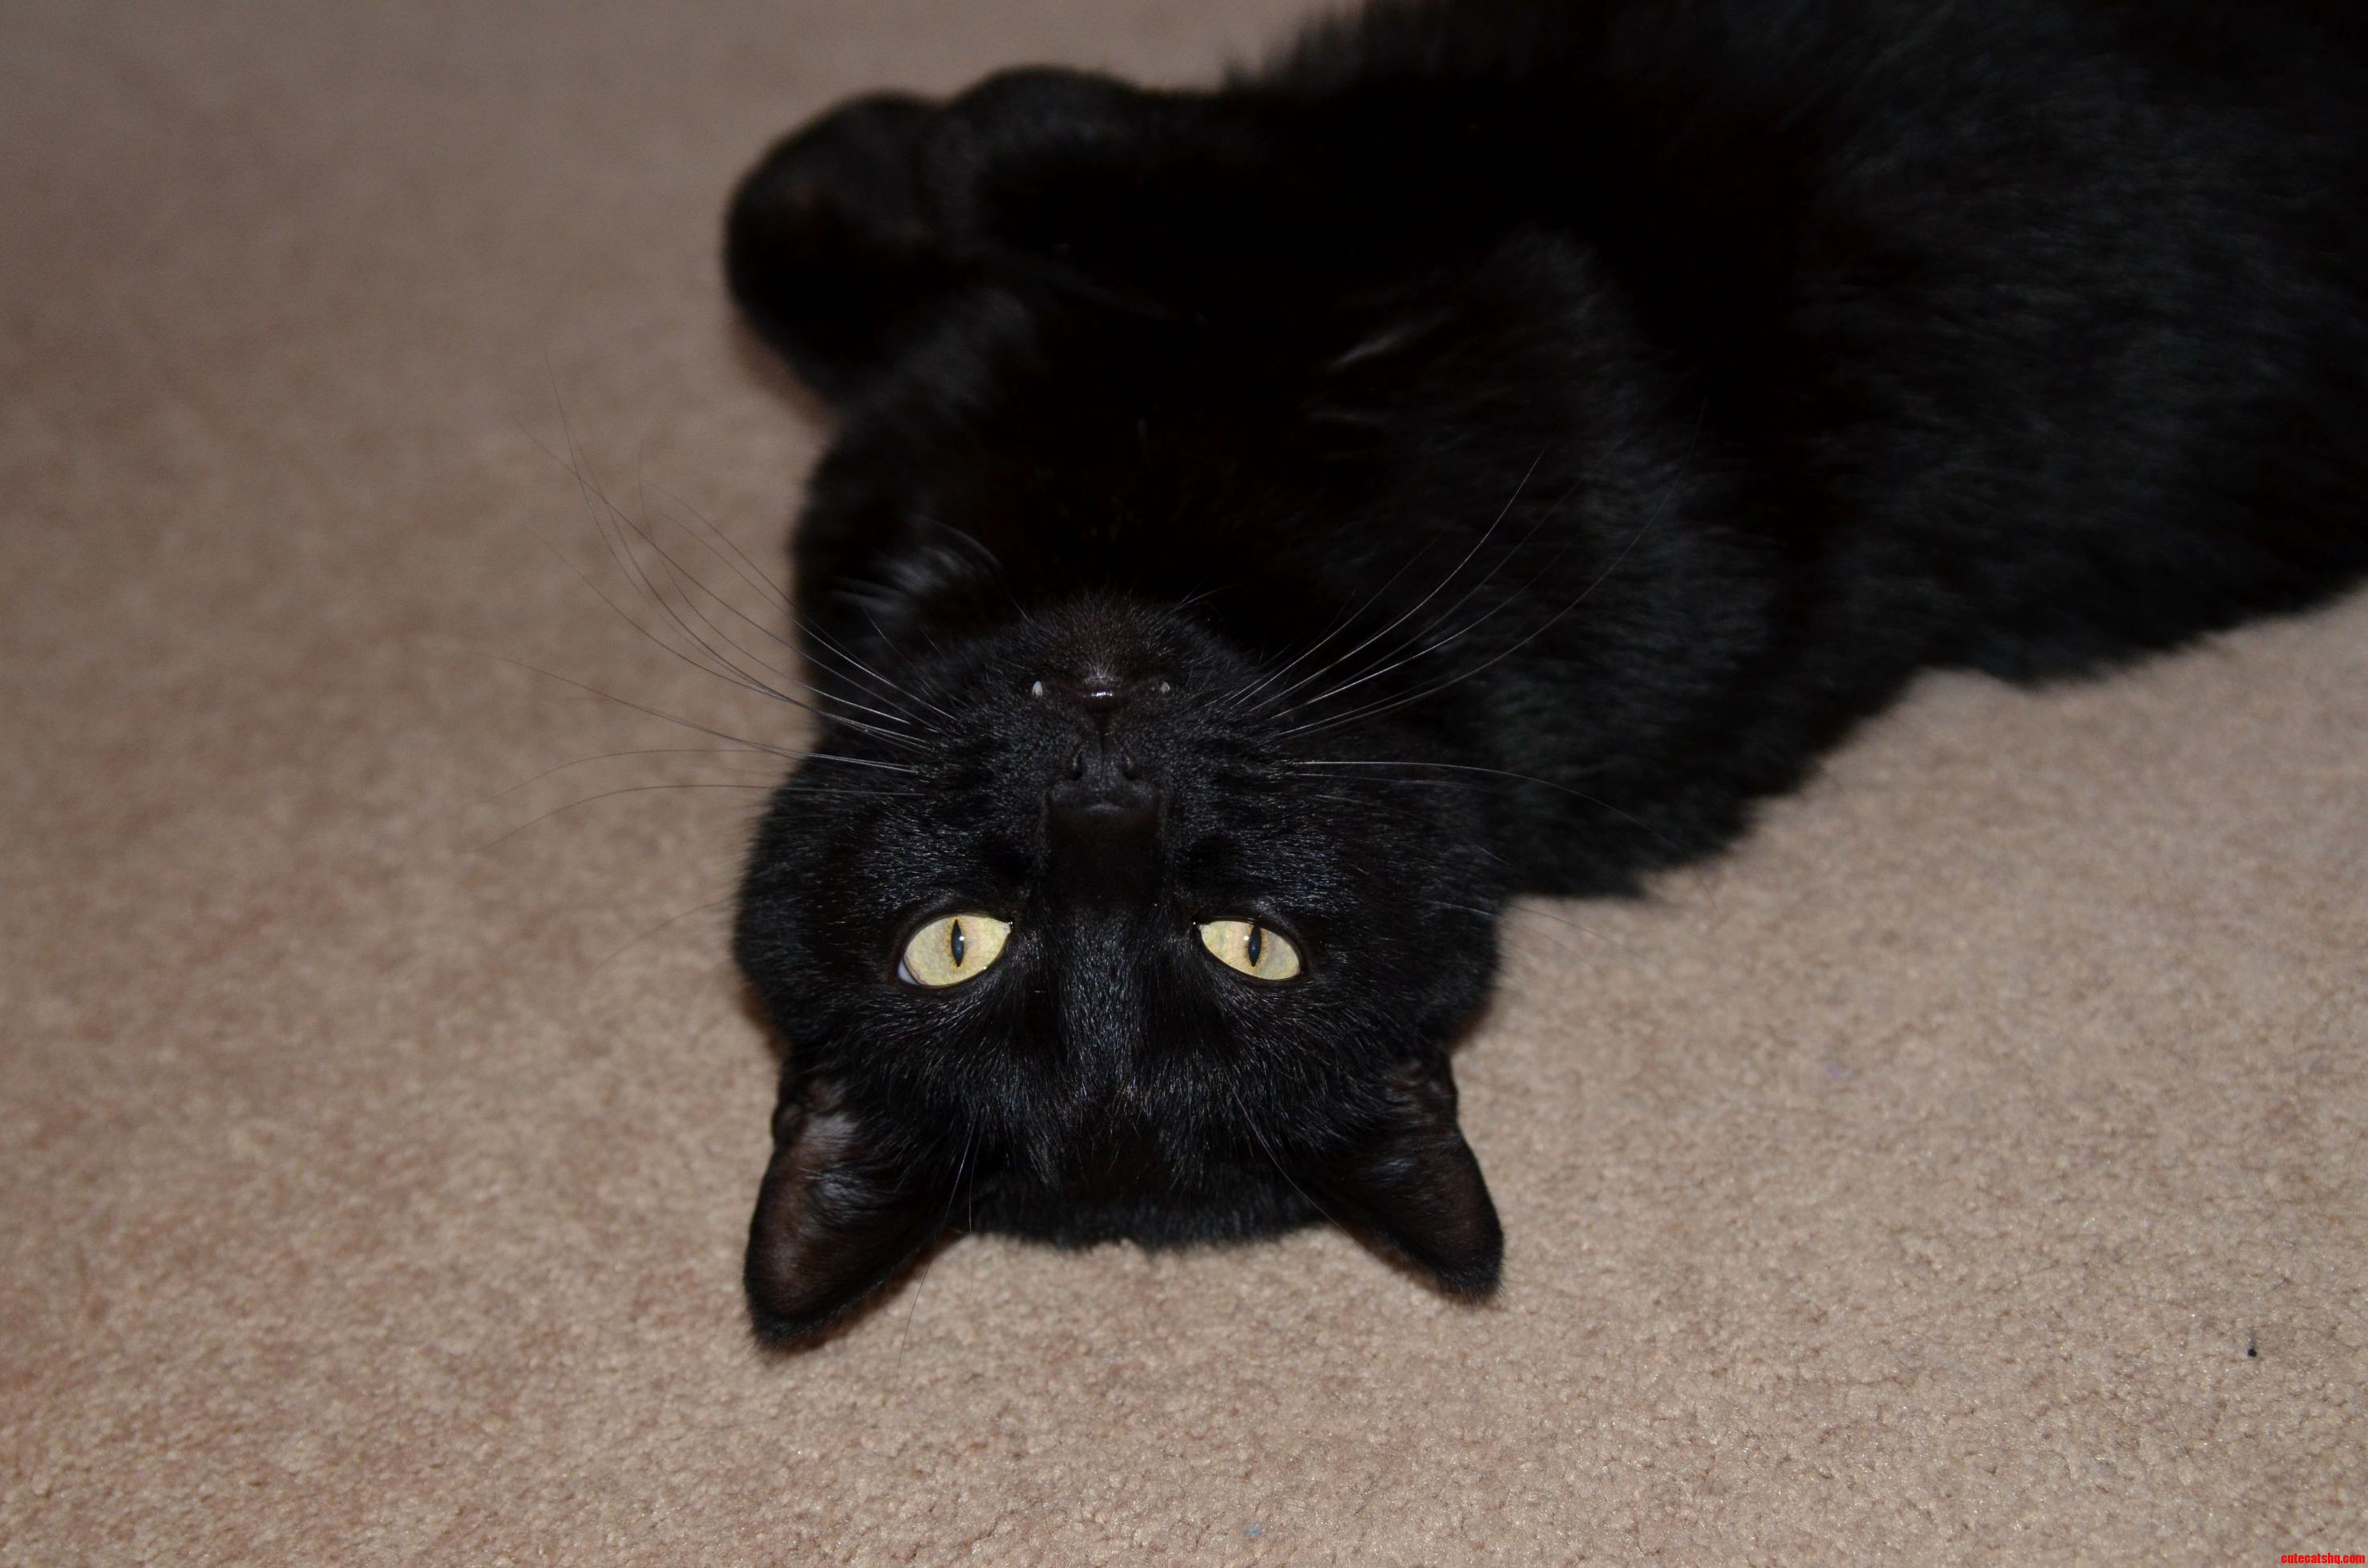 I Was Testing Out My New Dslr The Other Night And Managed To Capture Some Fang.